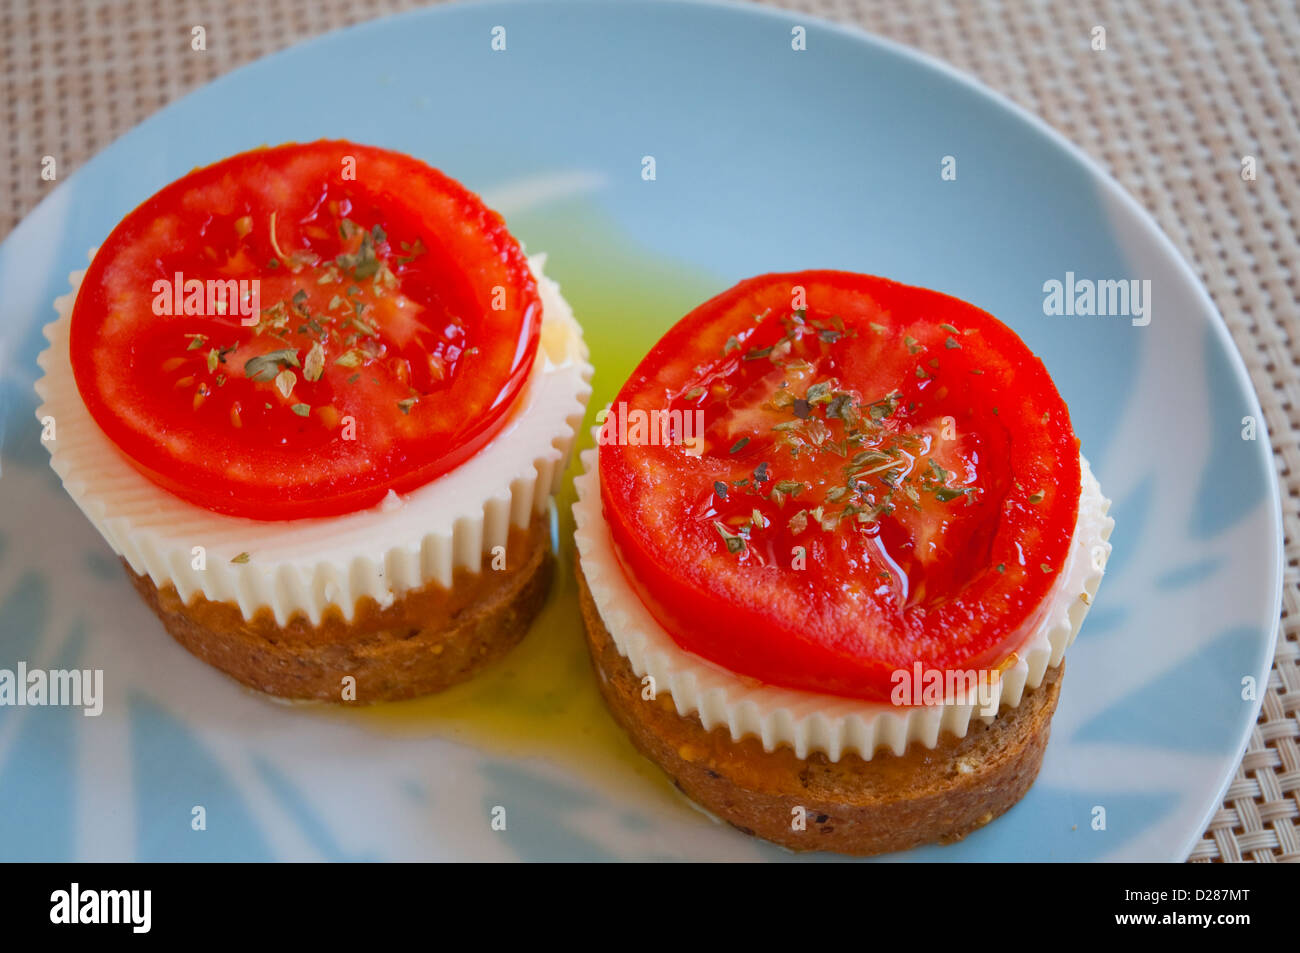 Spanish tapa: Sliced tomato and cottage cheese on toast. Close view. Stock Photo